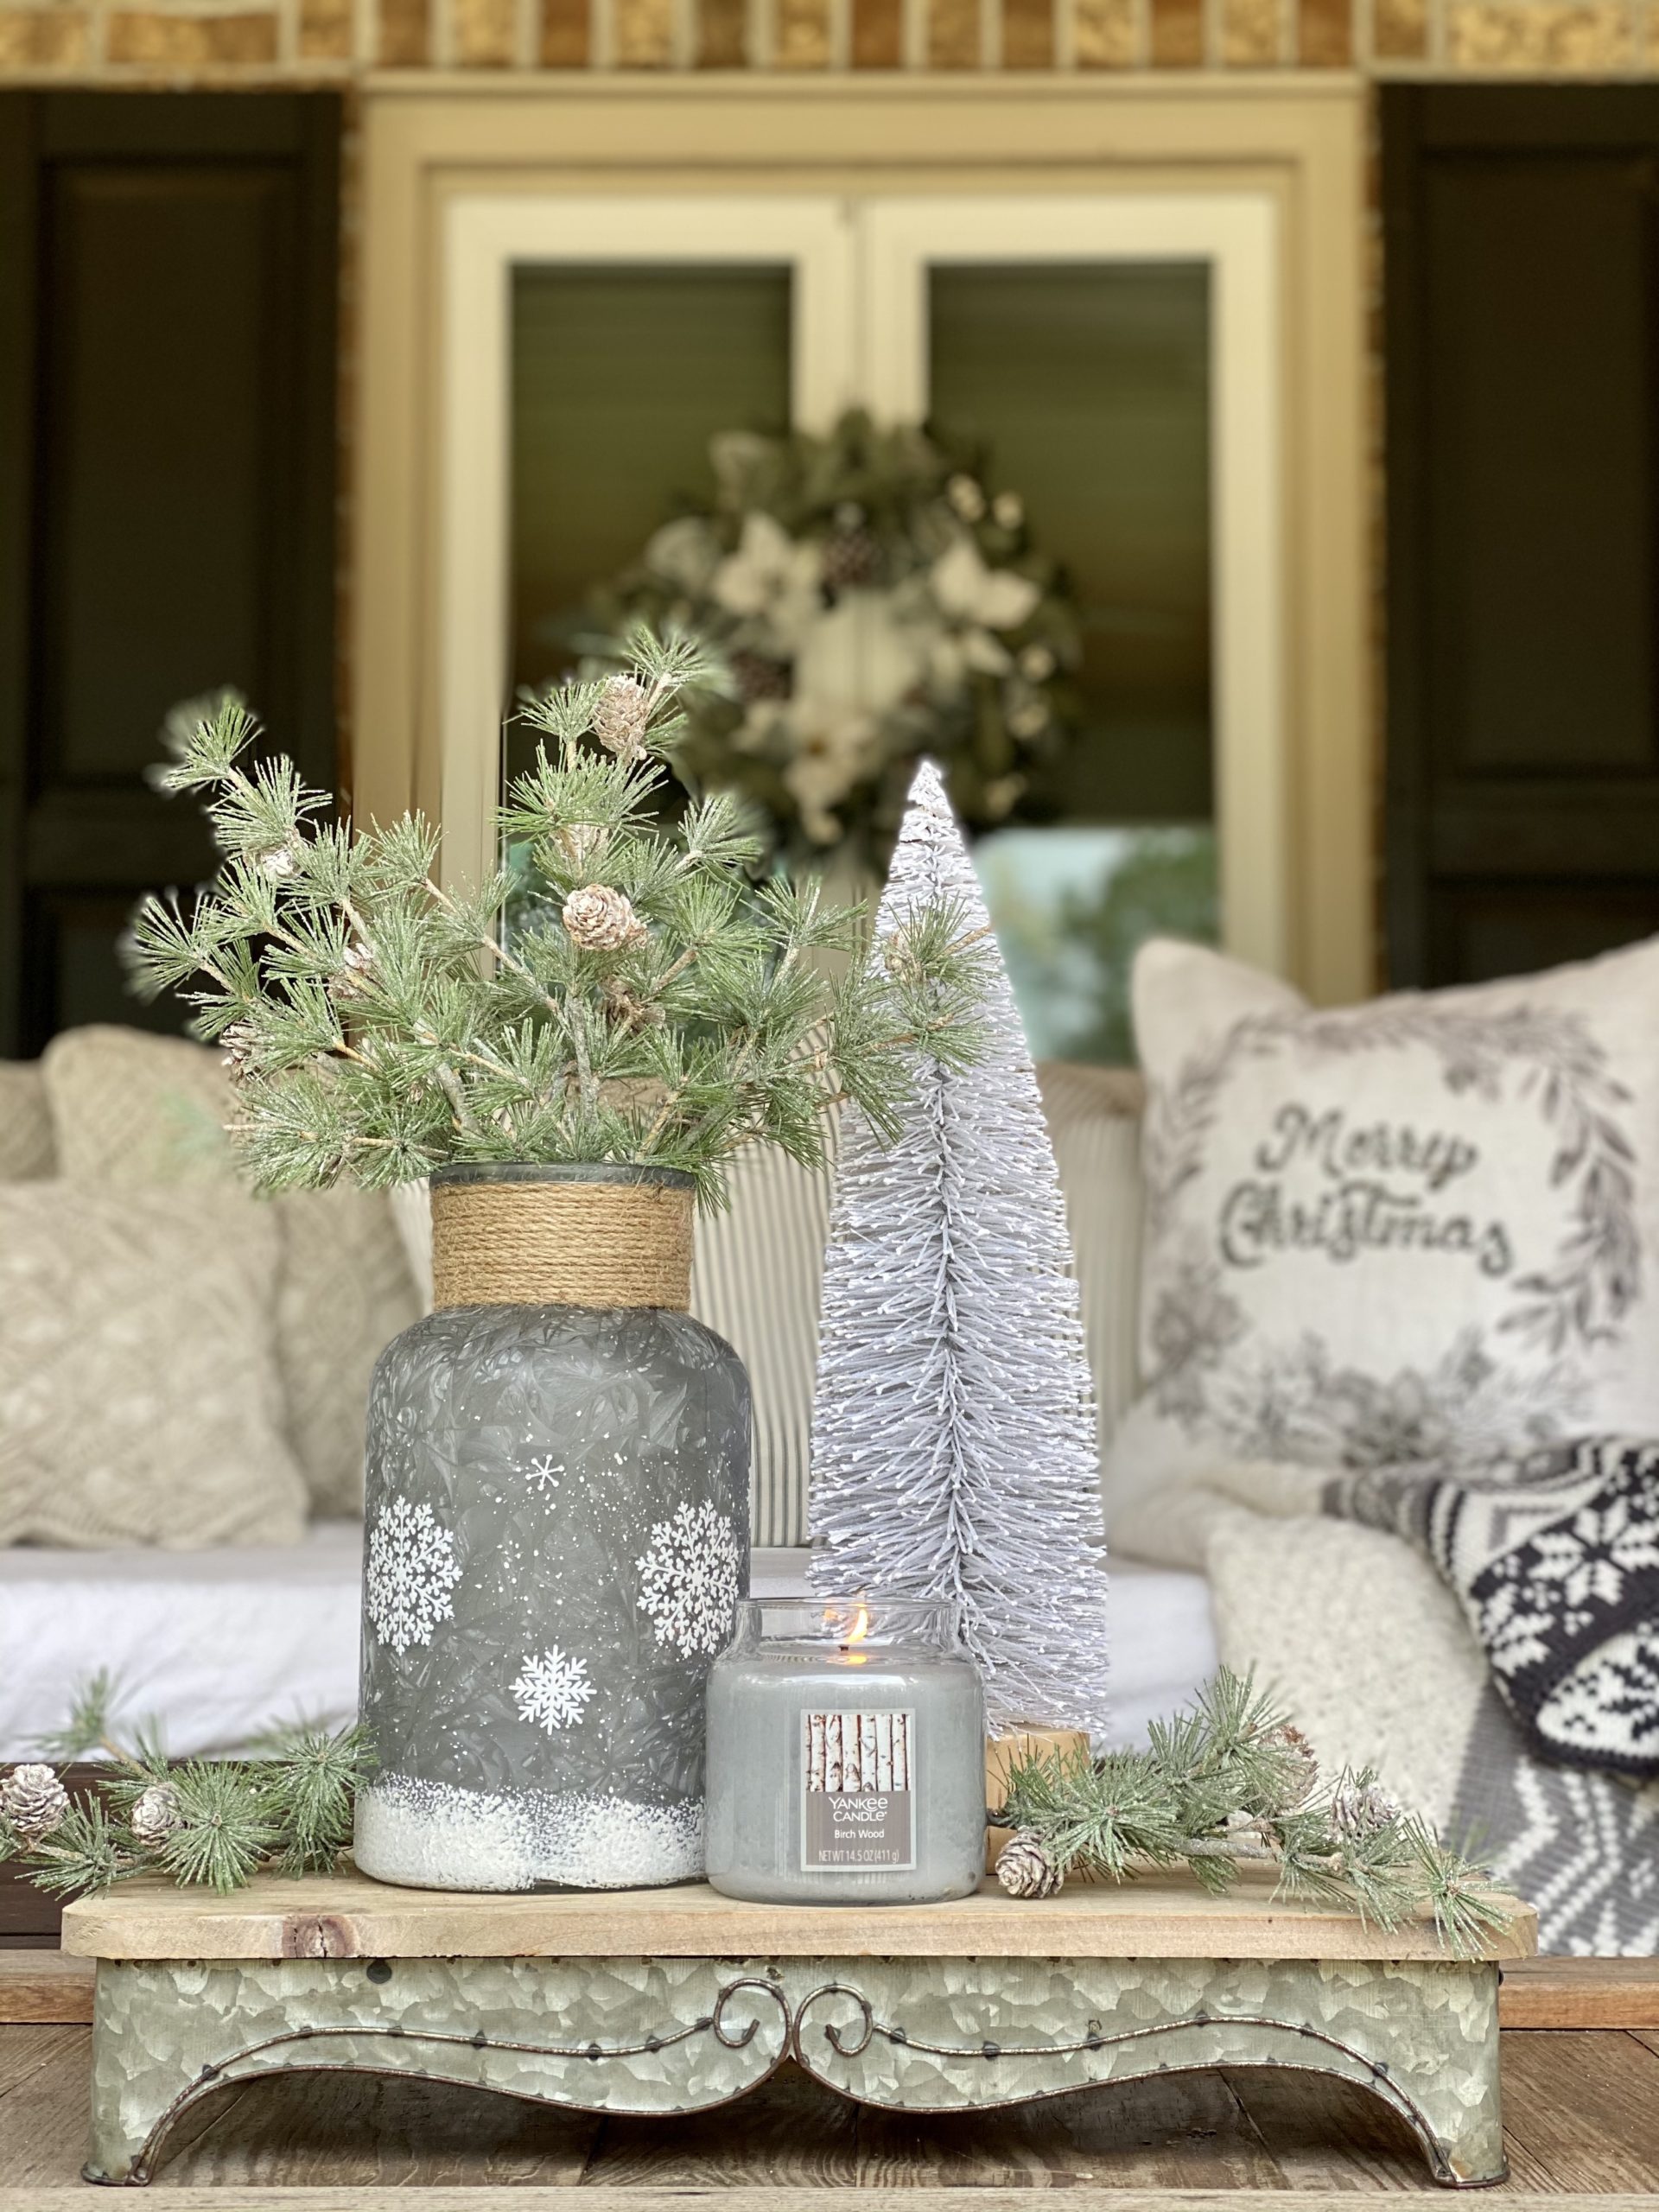 Coffee table Christmas decor in front of porch swing. Tray includes bottle brush tree, vase with greenery and a candle